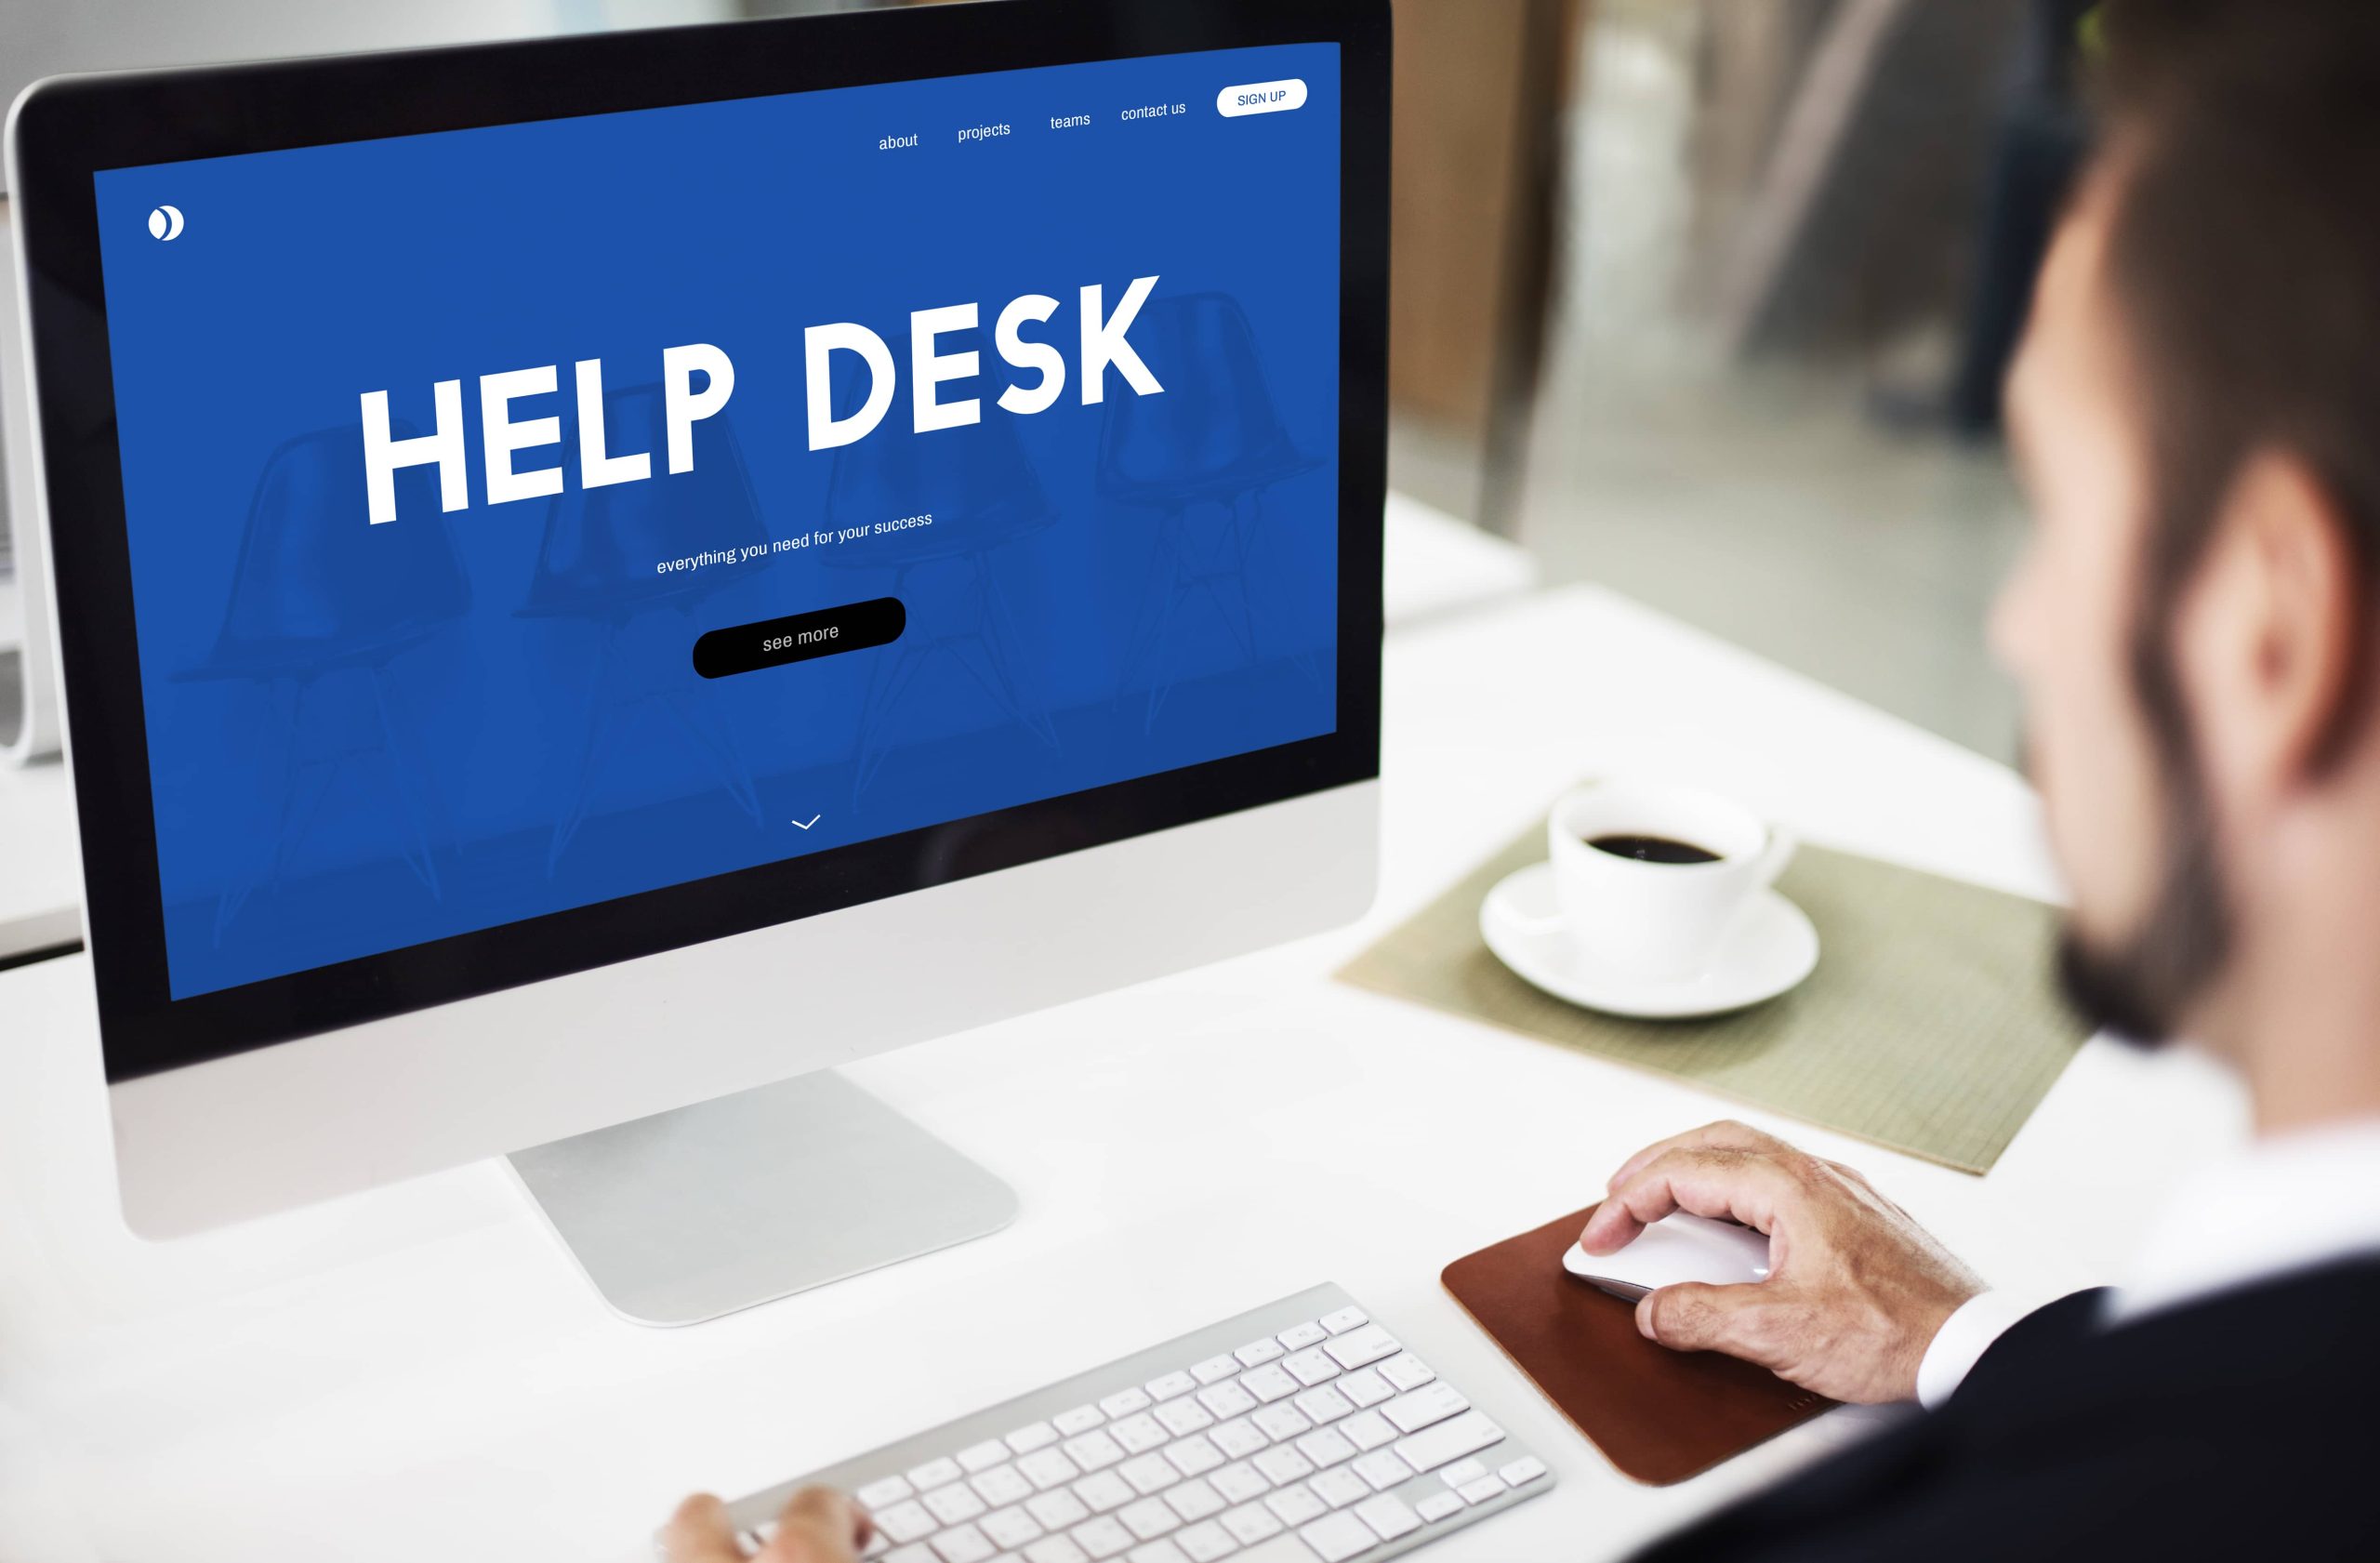 How to Use Help Desk Software to Improve Your Customer Support